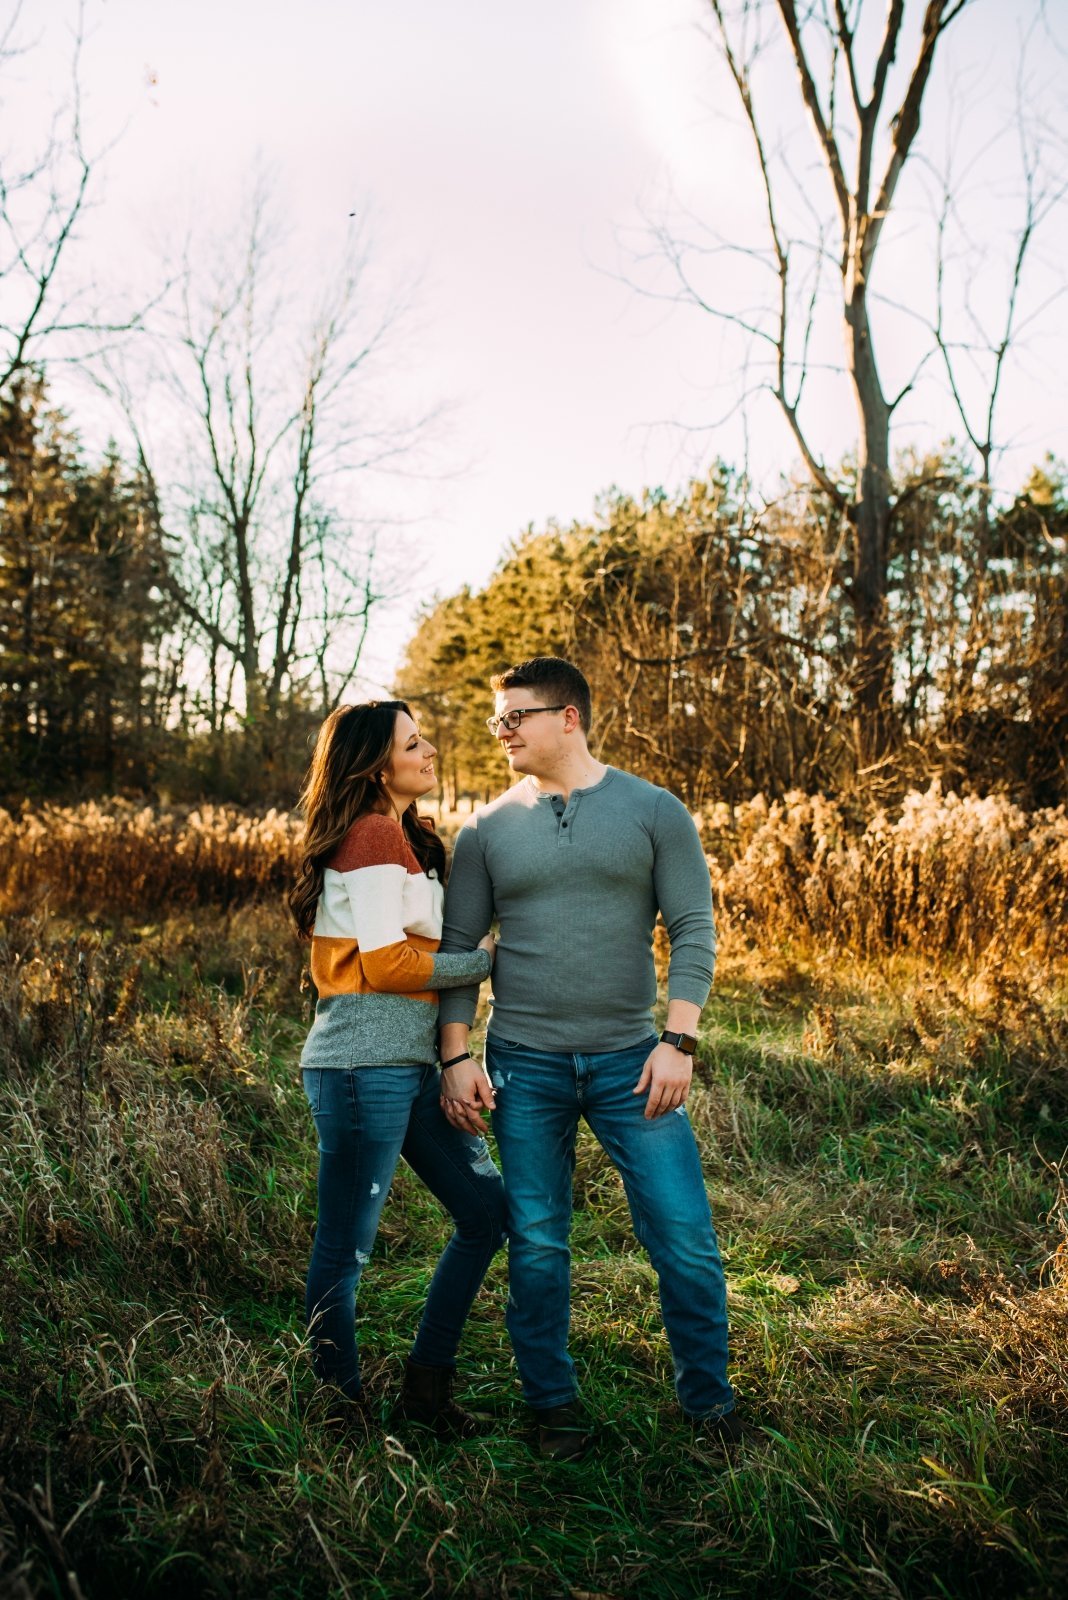 wisconsin engagement photographer what to wear engagement photos fall engagement photos engagement photo poses